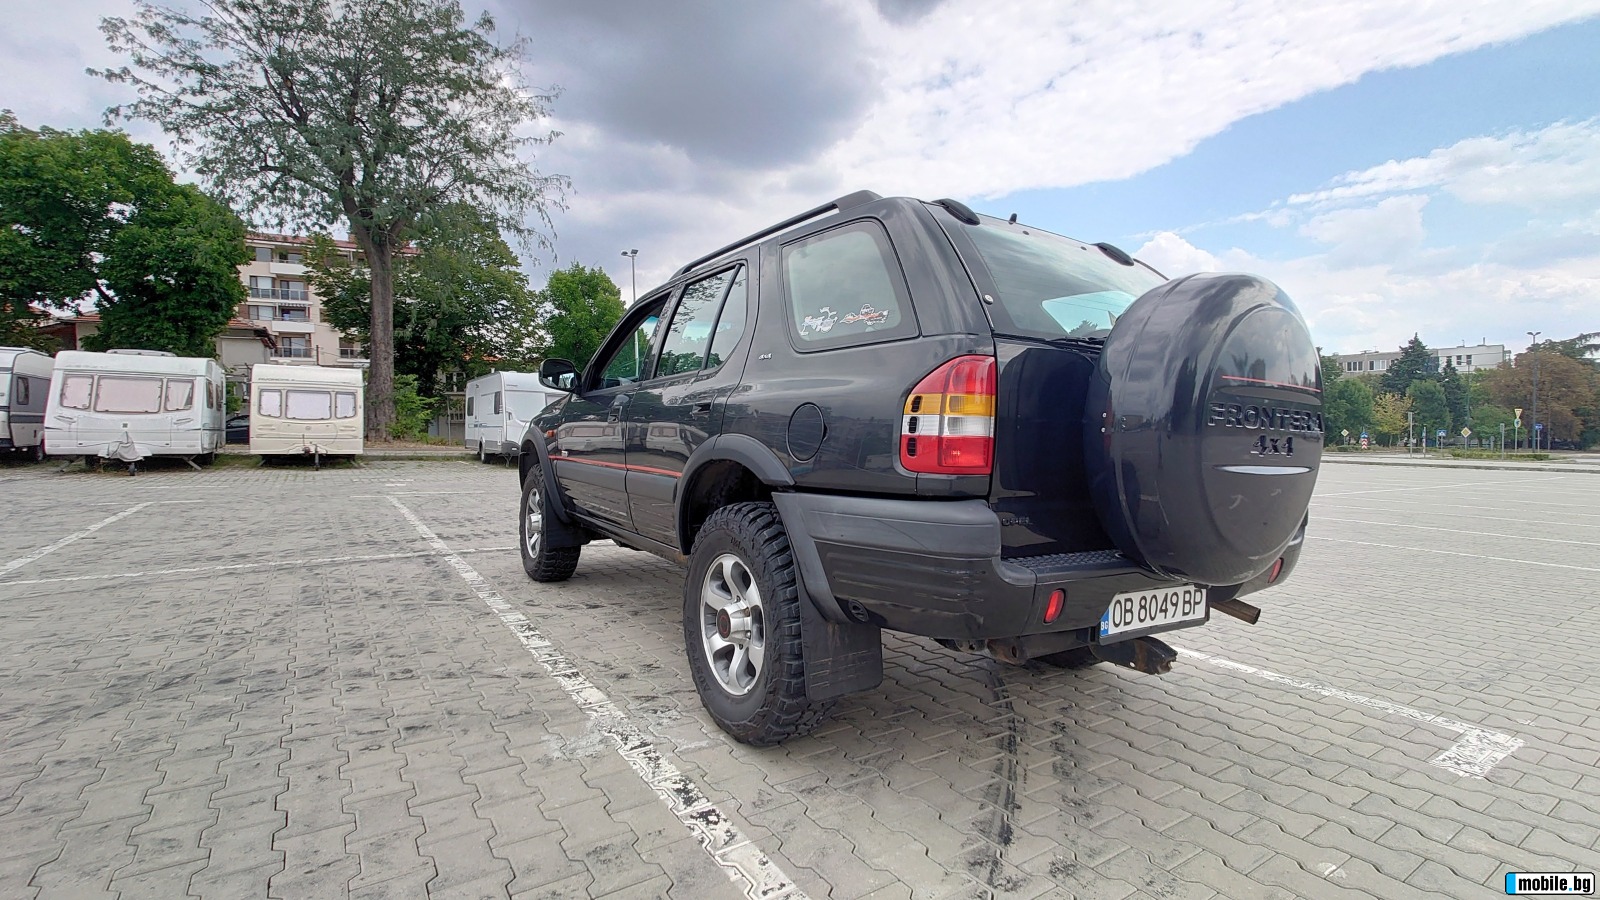 Opel Frontera Limited | Mobile.bg   4